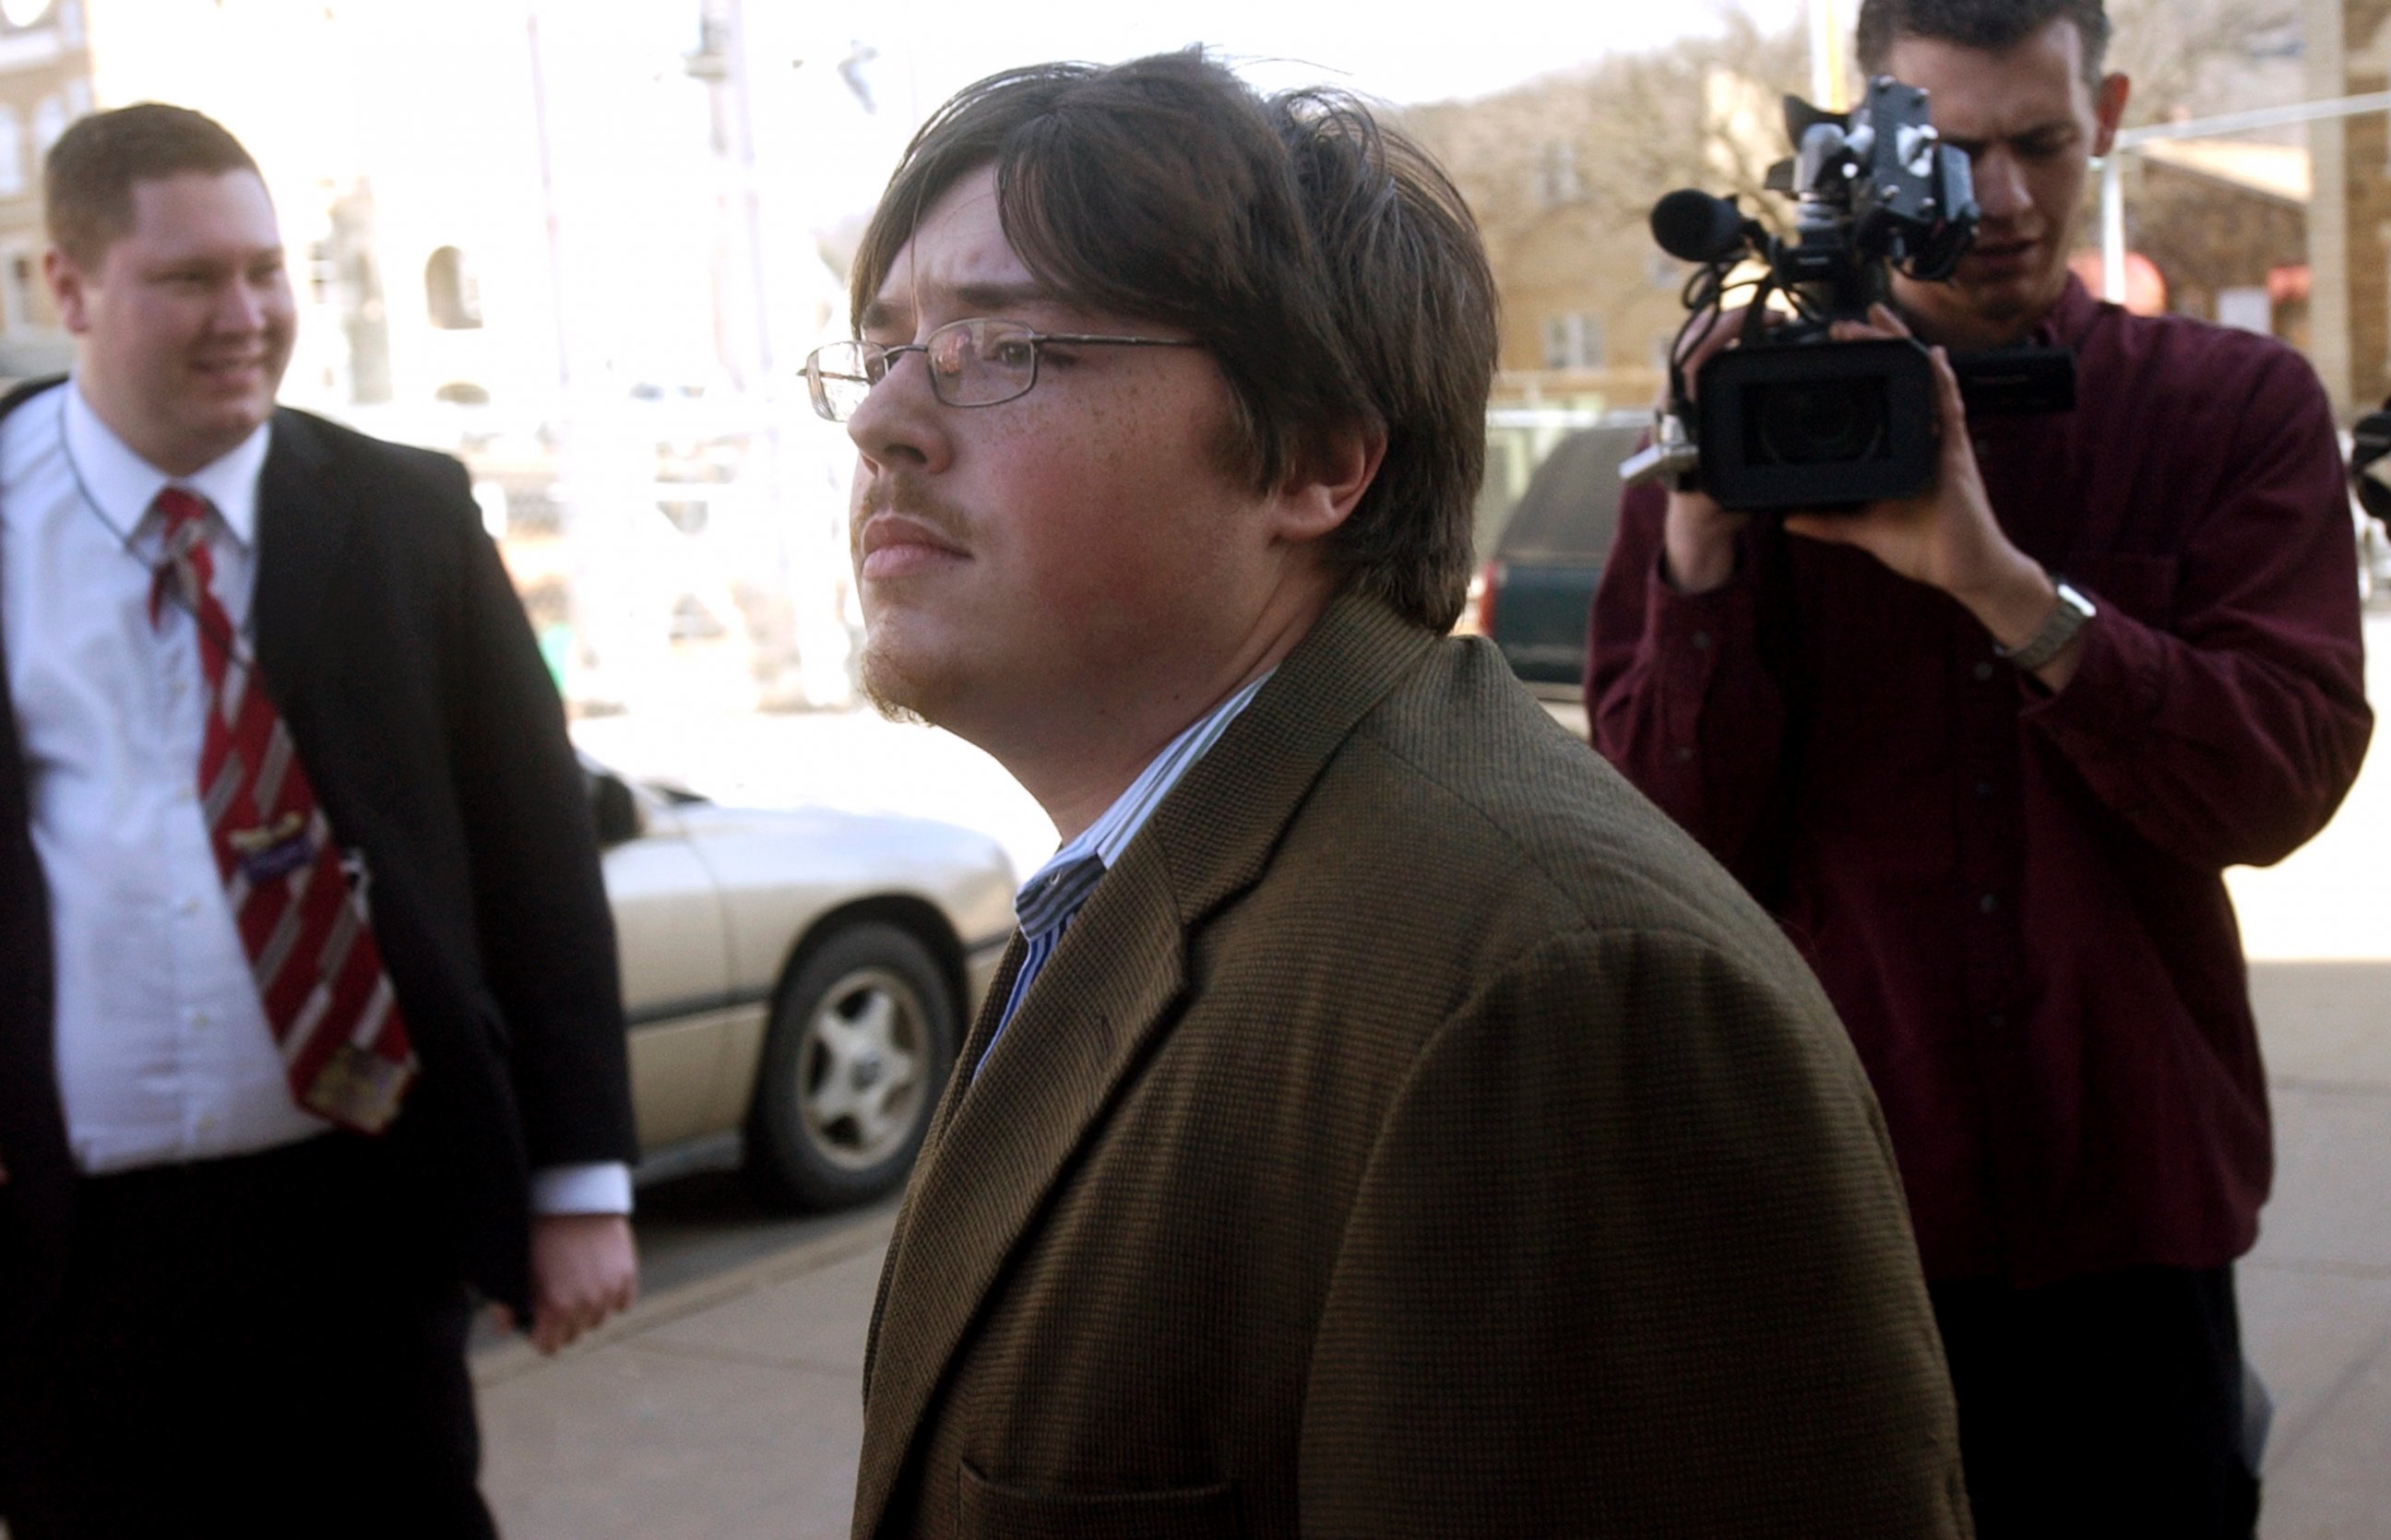 PHOTO: Jonesboro school shooter Mitchell Johnson, center, walks past members of the media during a lunch break from his trial at the Federal Building, Jan. 29, 2008 in Fayetteville, Ark. 